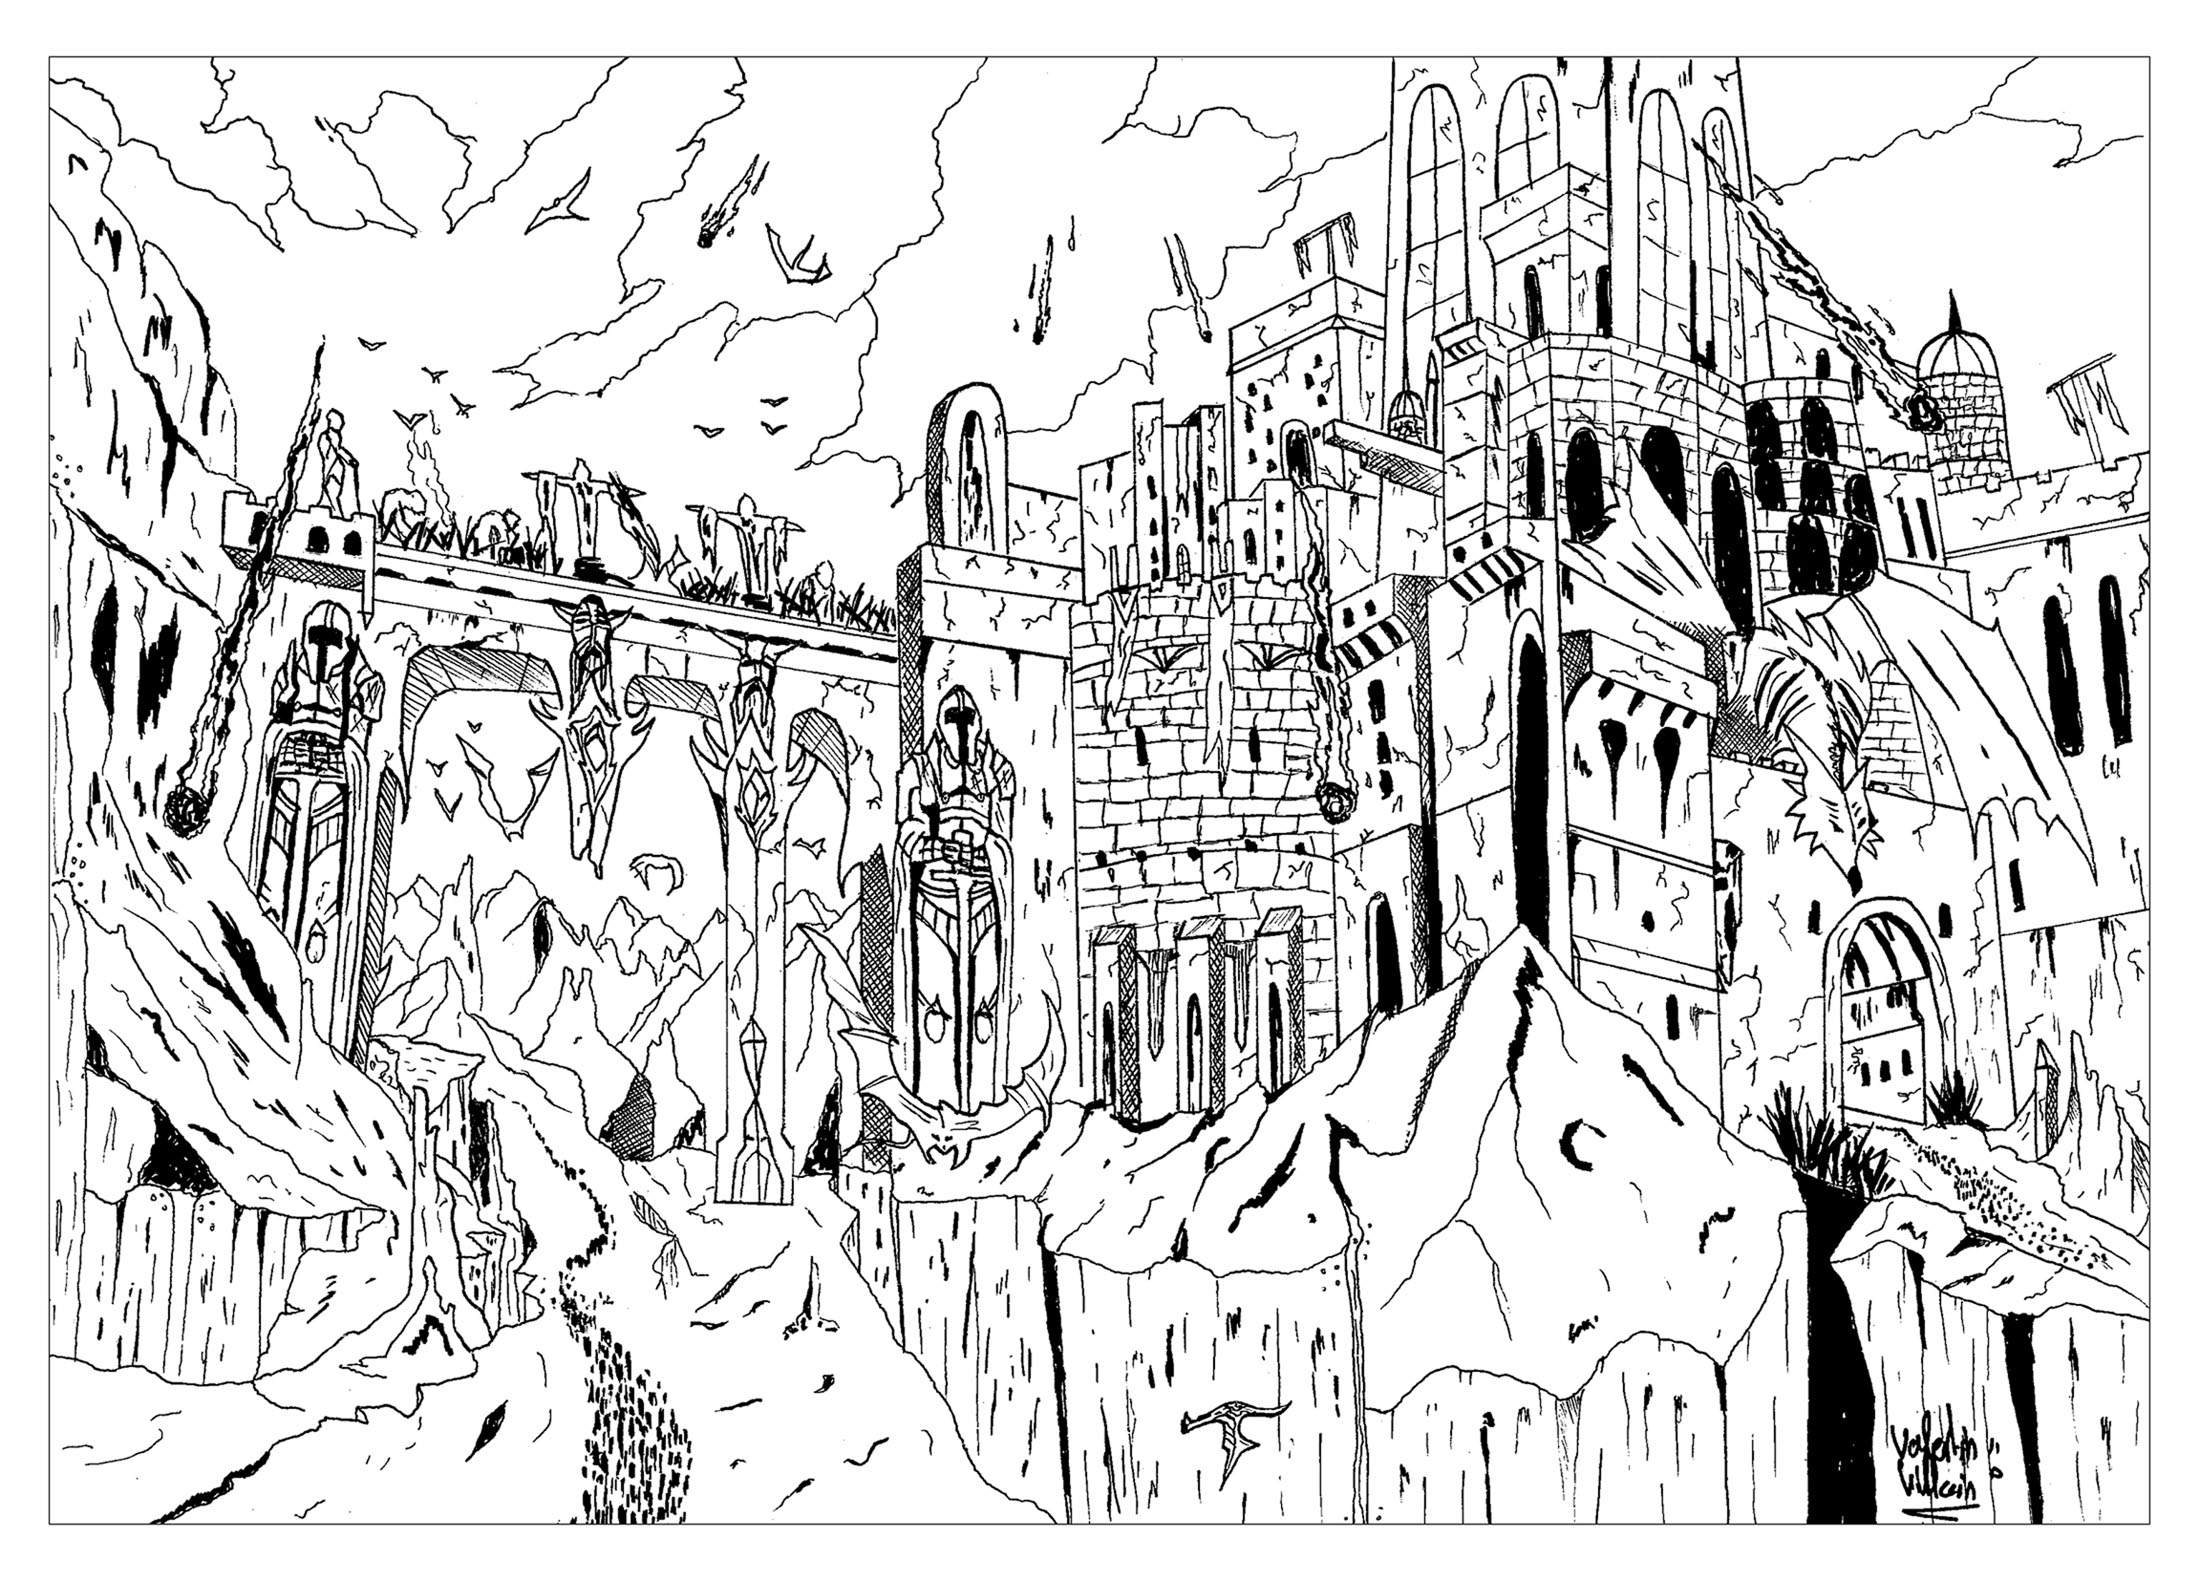 Coloring a fortress being attacked by dragons. A coloring page inspired by heoric fantasy books (Lord of the Rings, Dungeons and Dragons ...) and series like Game of Thrones ...